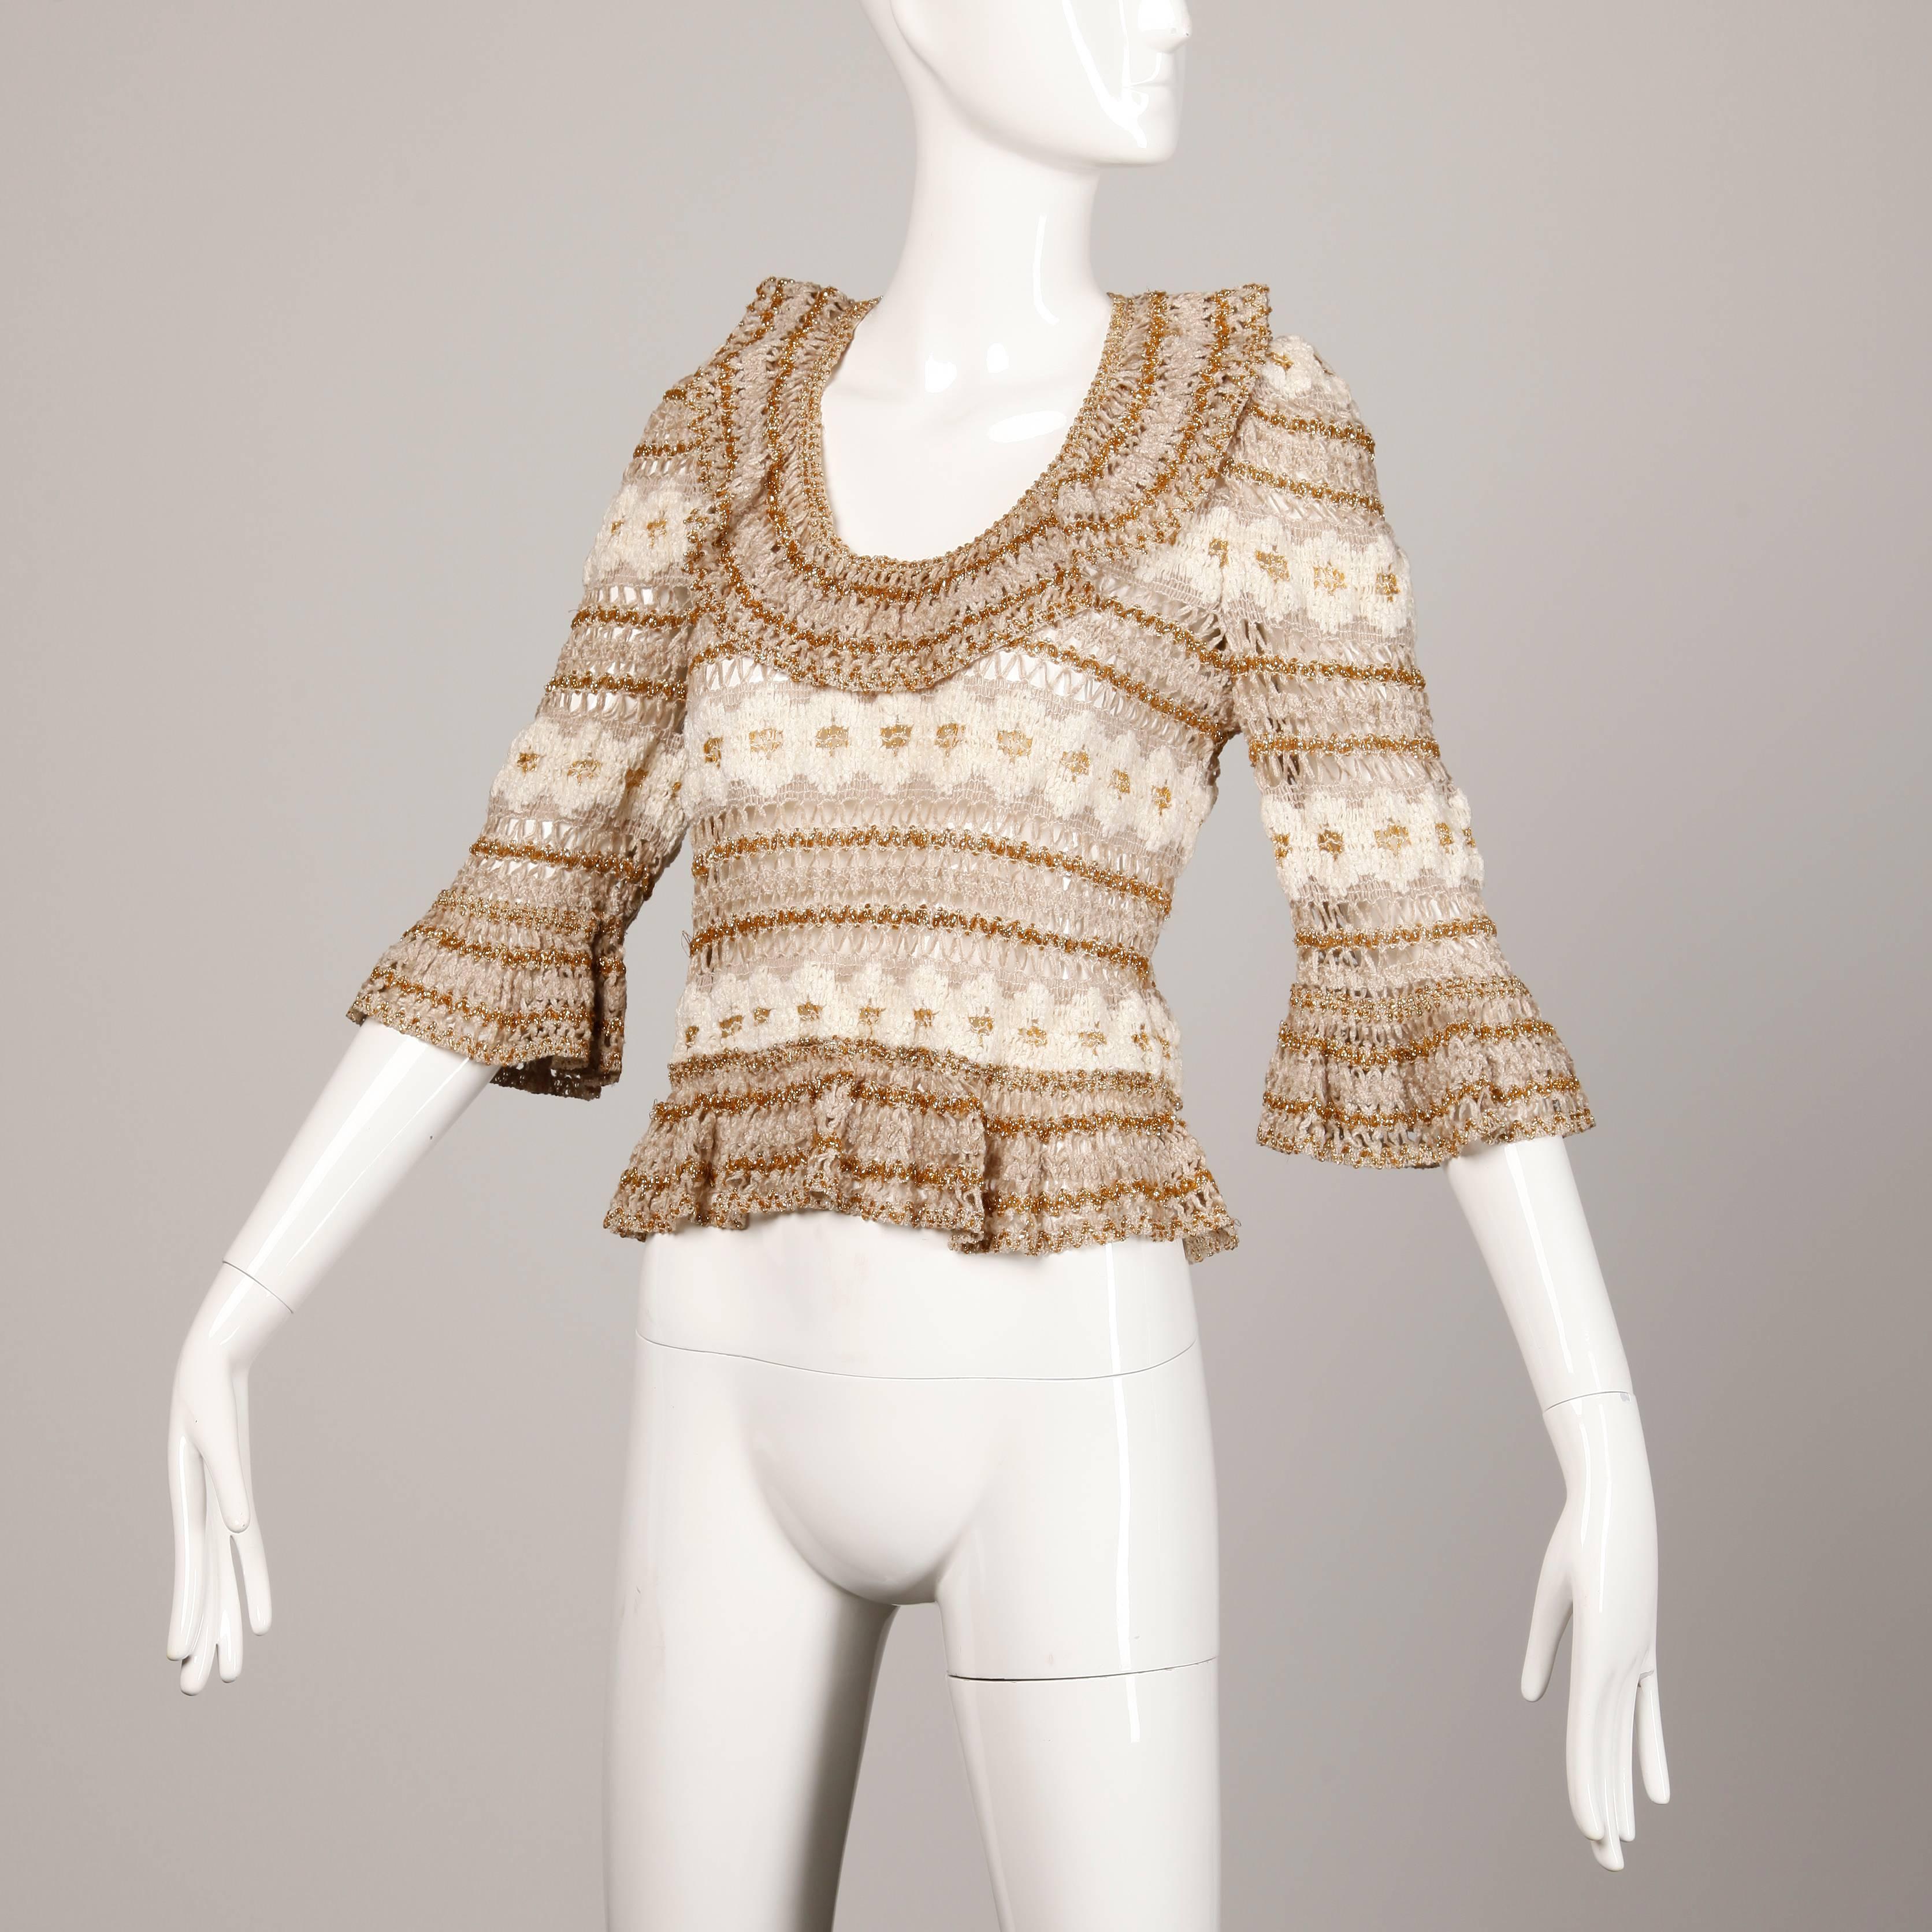 Amazing vintage metallic sweater top by Lillie Rubin. Bell sleeves and ruffled scoop neck.

Details: 

Unlined
Marked Size: 12
Estimated Size: Medium
Color: Tan/ Beige/ Gold
Fabric: 36% Acrylic/ 15% Polyester/ 10% Rayon Knit
Label: Lillie